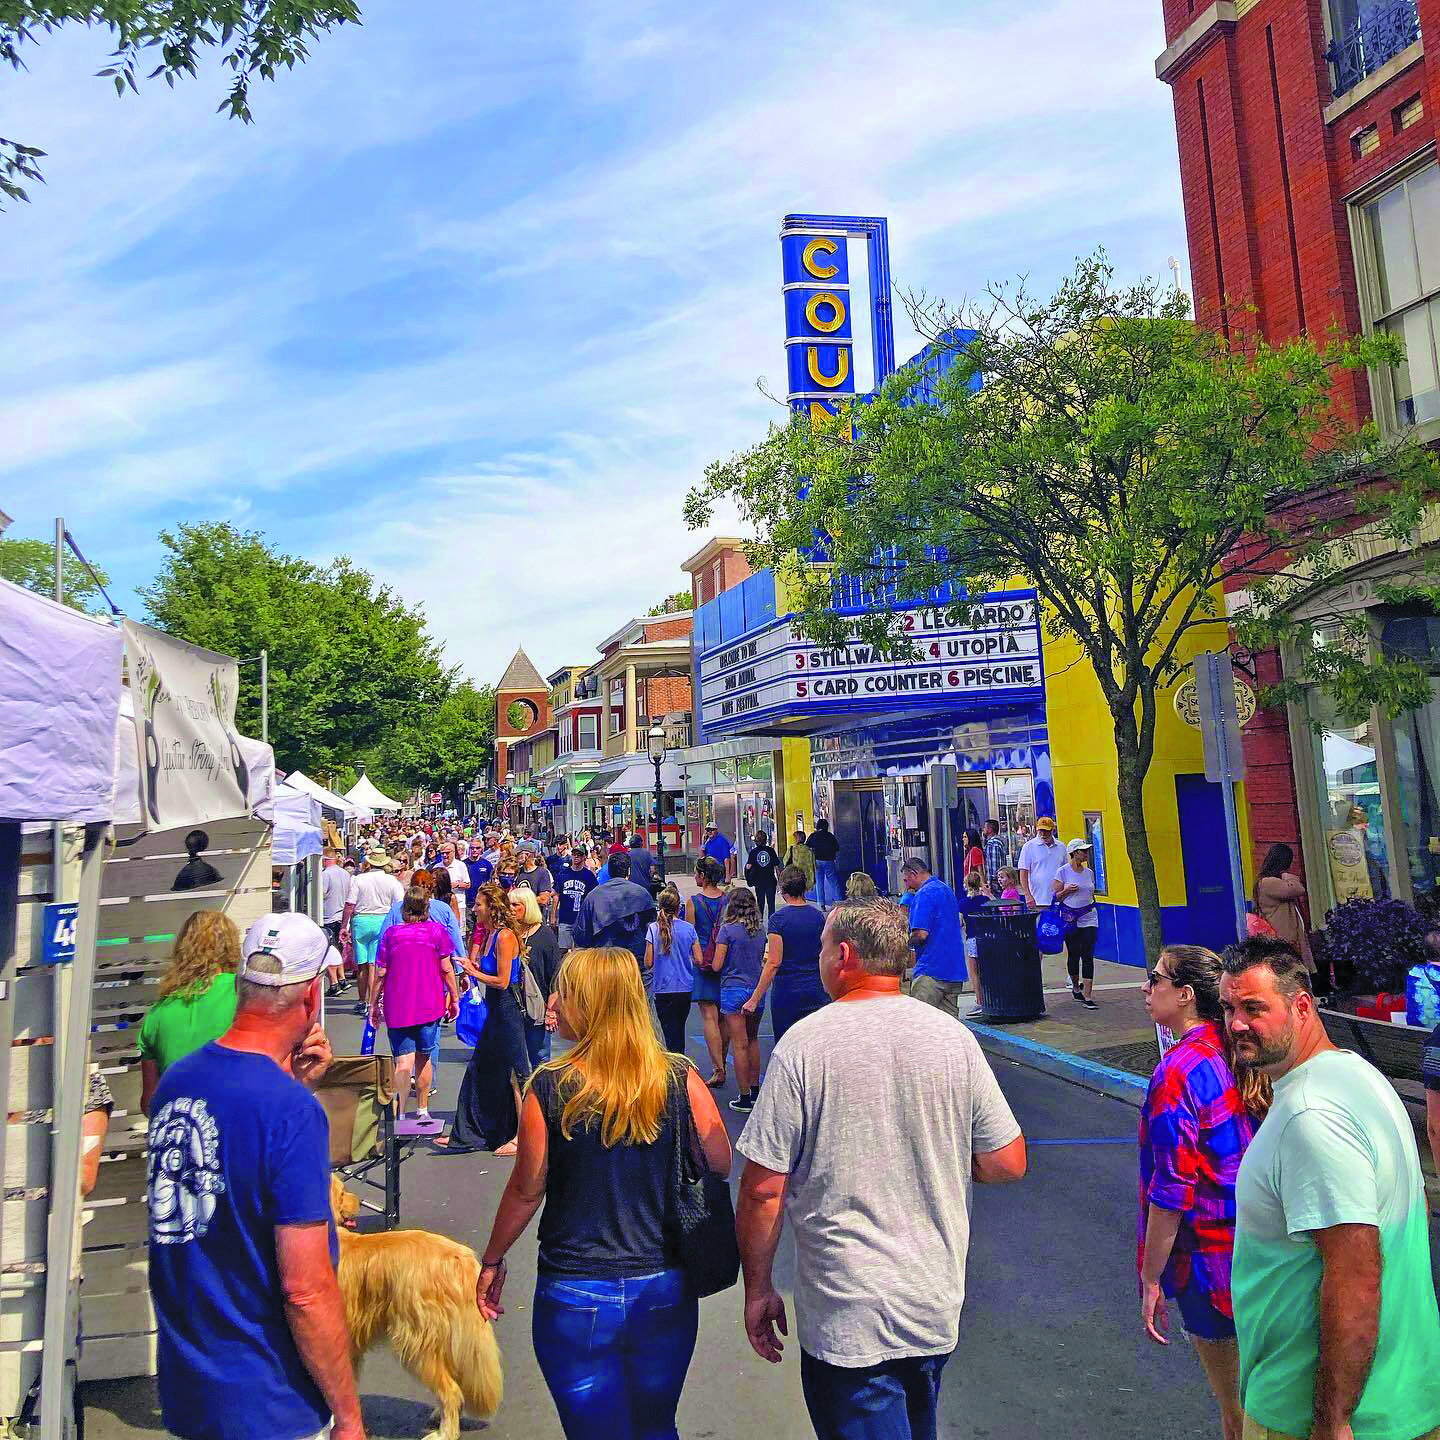 The crowd fills State Street during the Doylestown Arts Festival Sept. 11 and 12.